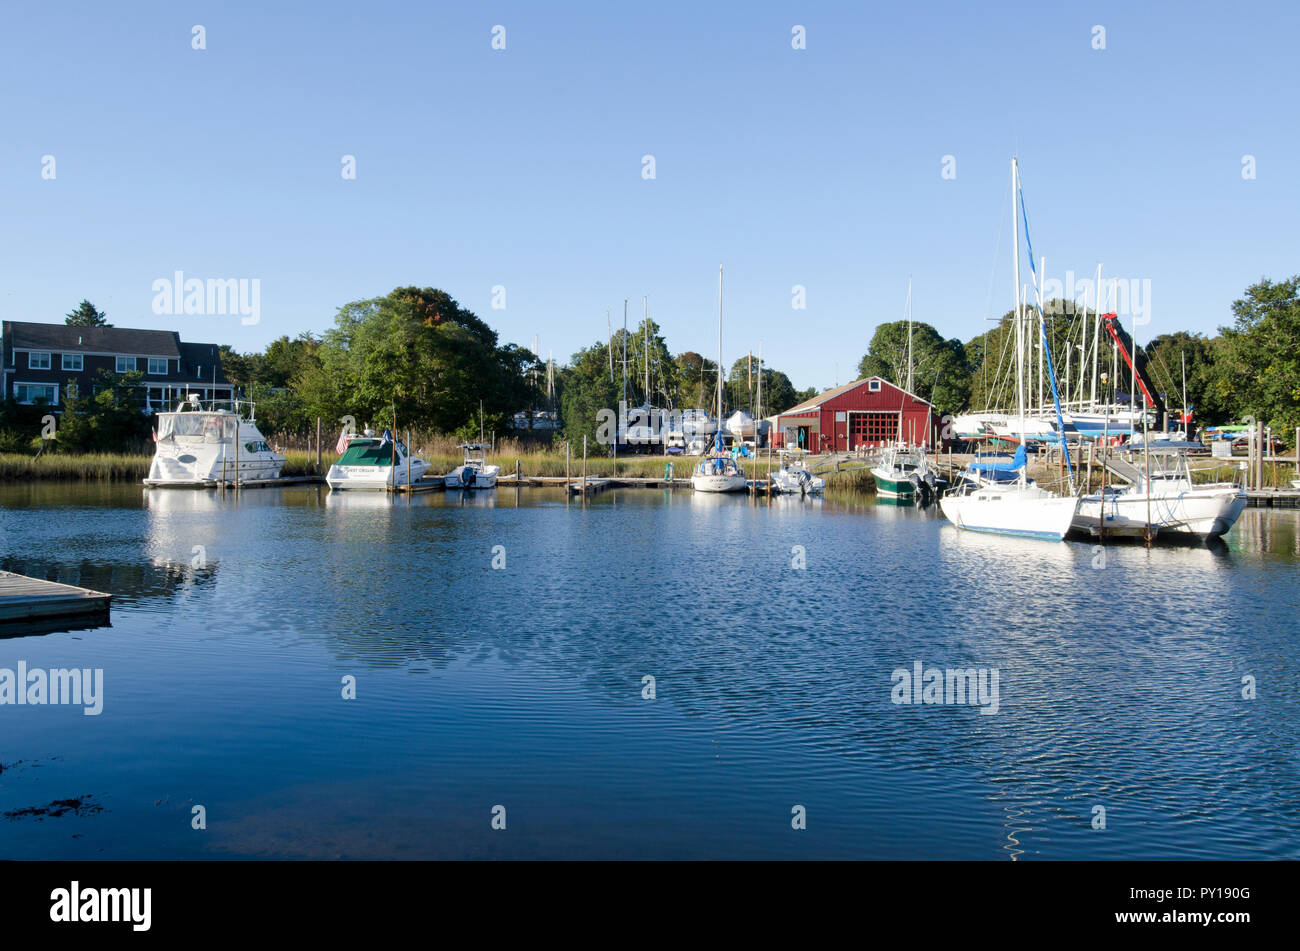 Scenic Pocasset River, Bourne, Cape Cod, Massachusetts, USA with boats docked and boatyard marina beyond on a bright sunny blue sky morning Stock Photo